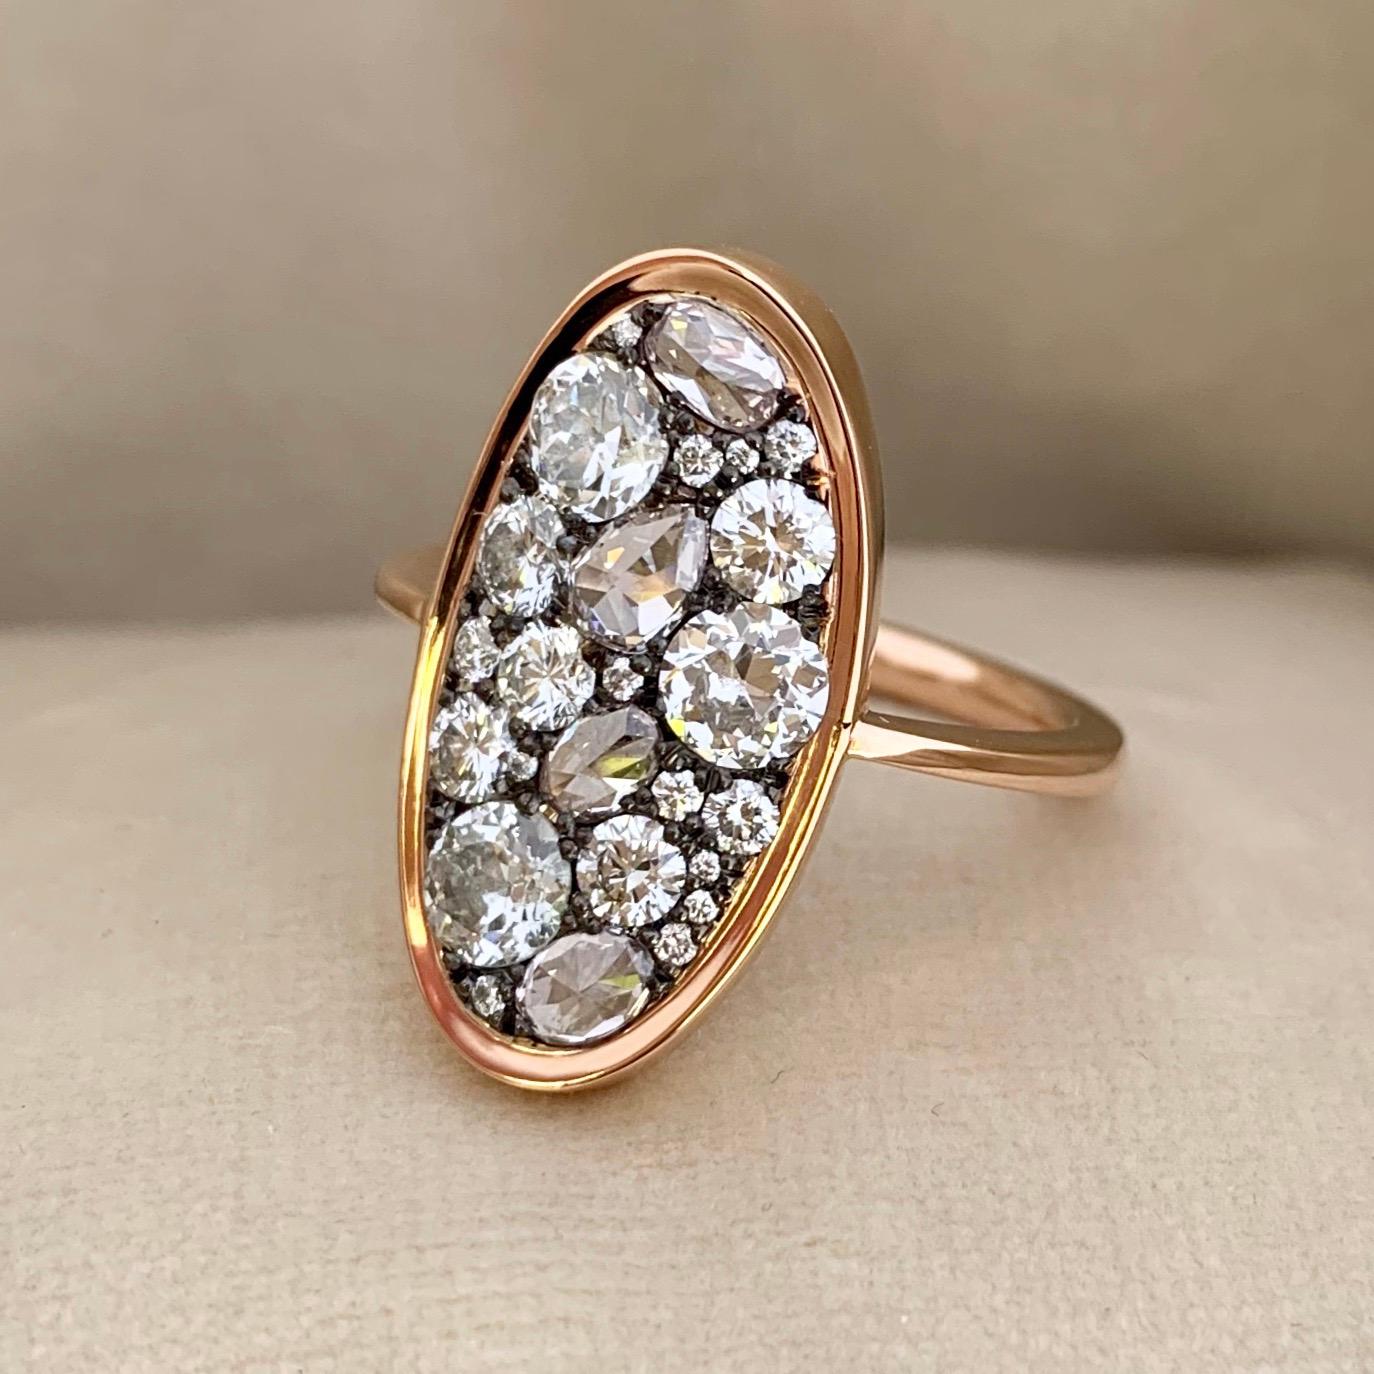 One of a kind ring in 18K Rose gold 5 g & blackened sterling silver (The stones are set on silver to create a black background for the stones)
Set with 3 white old-cut diamonds 0,75 ct., 4 light pink rose-cut diamonds 0,79 ct., white DEGVVS